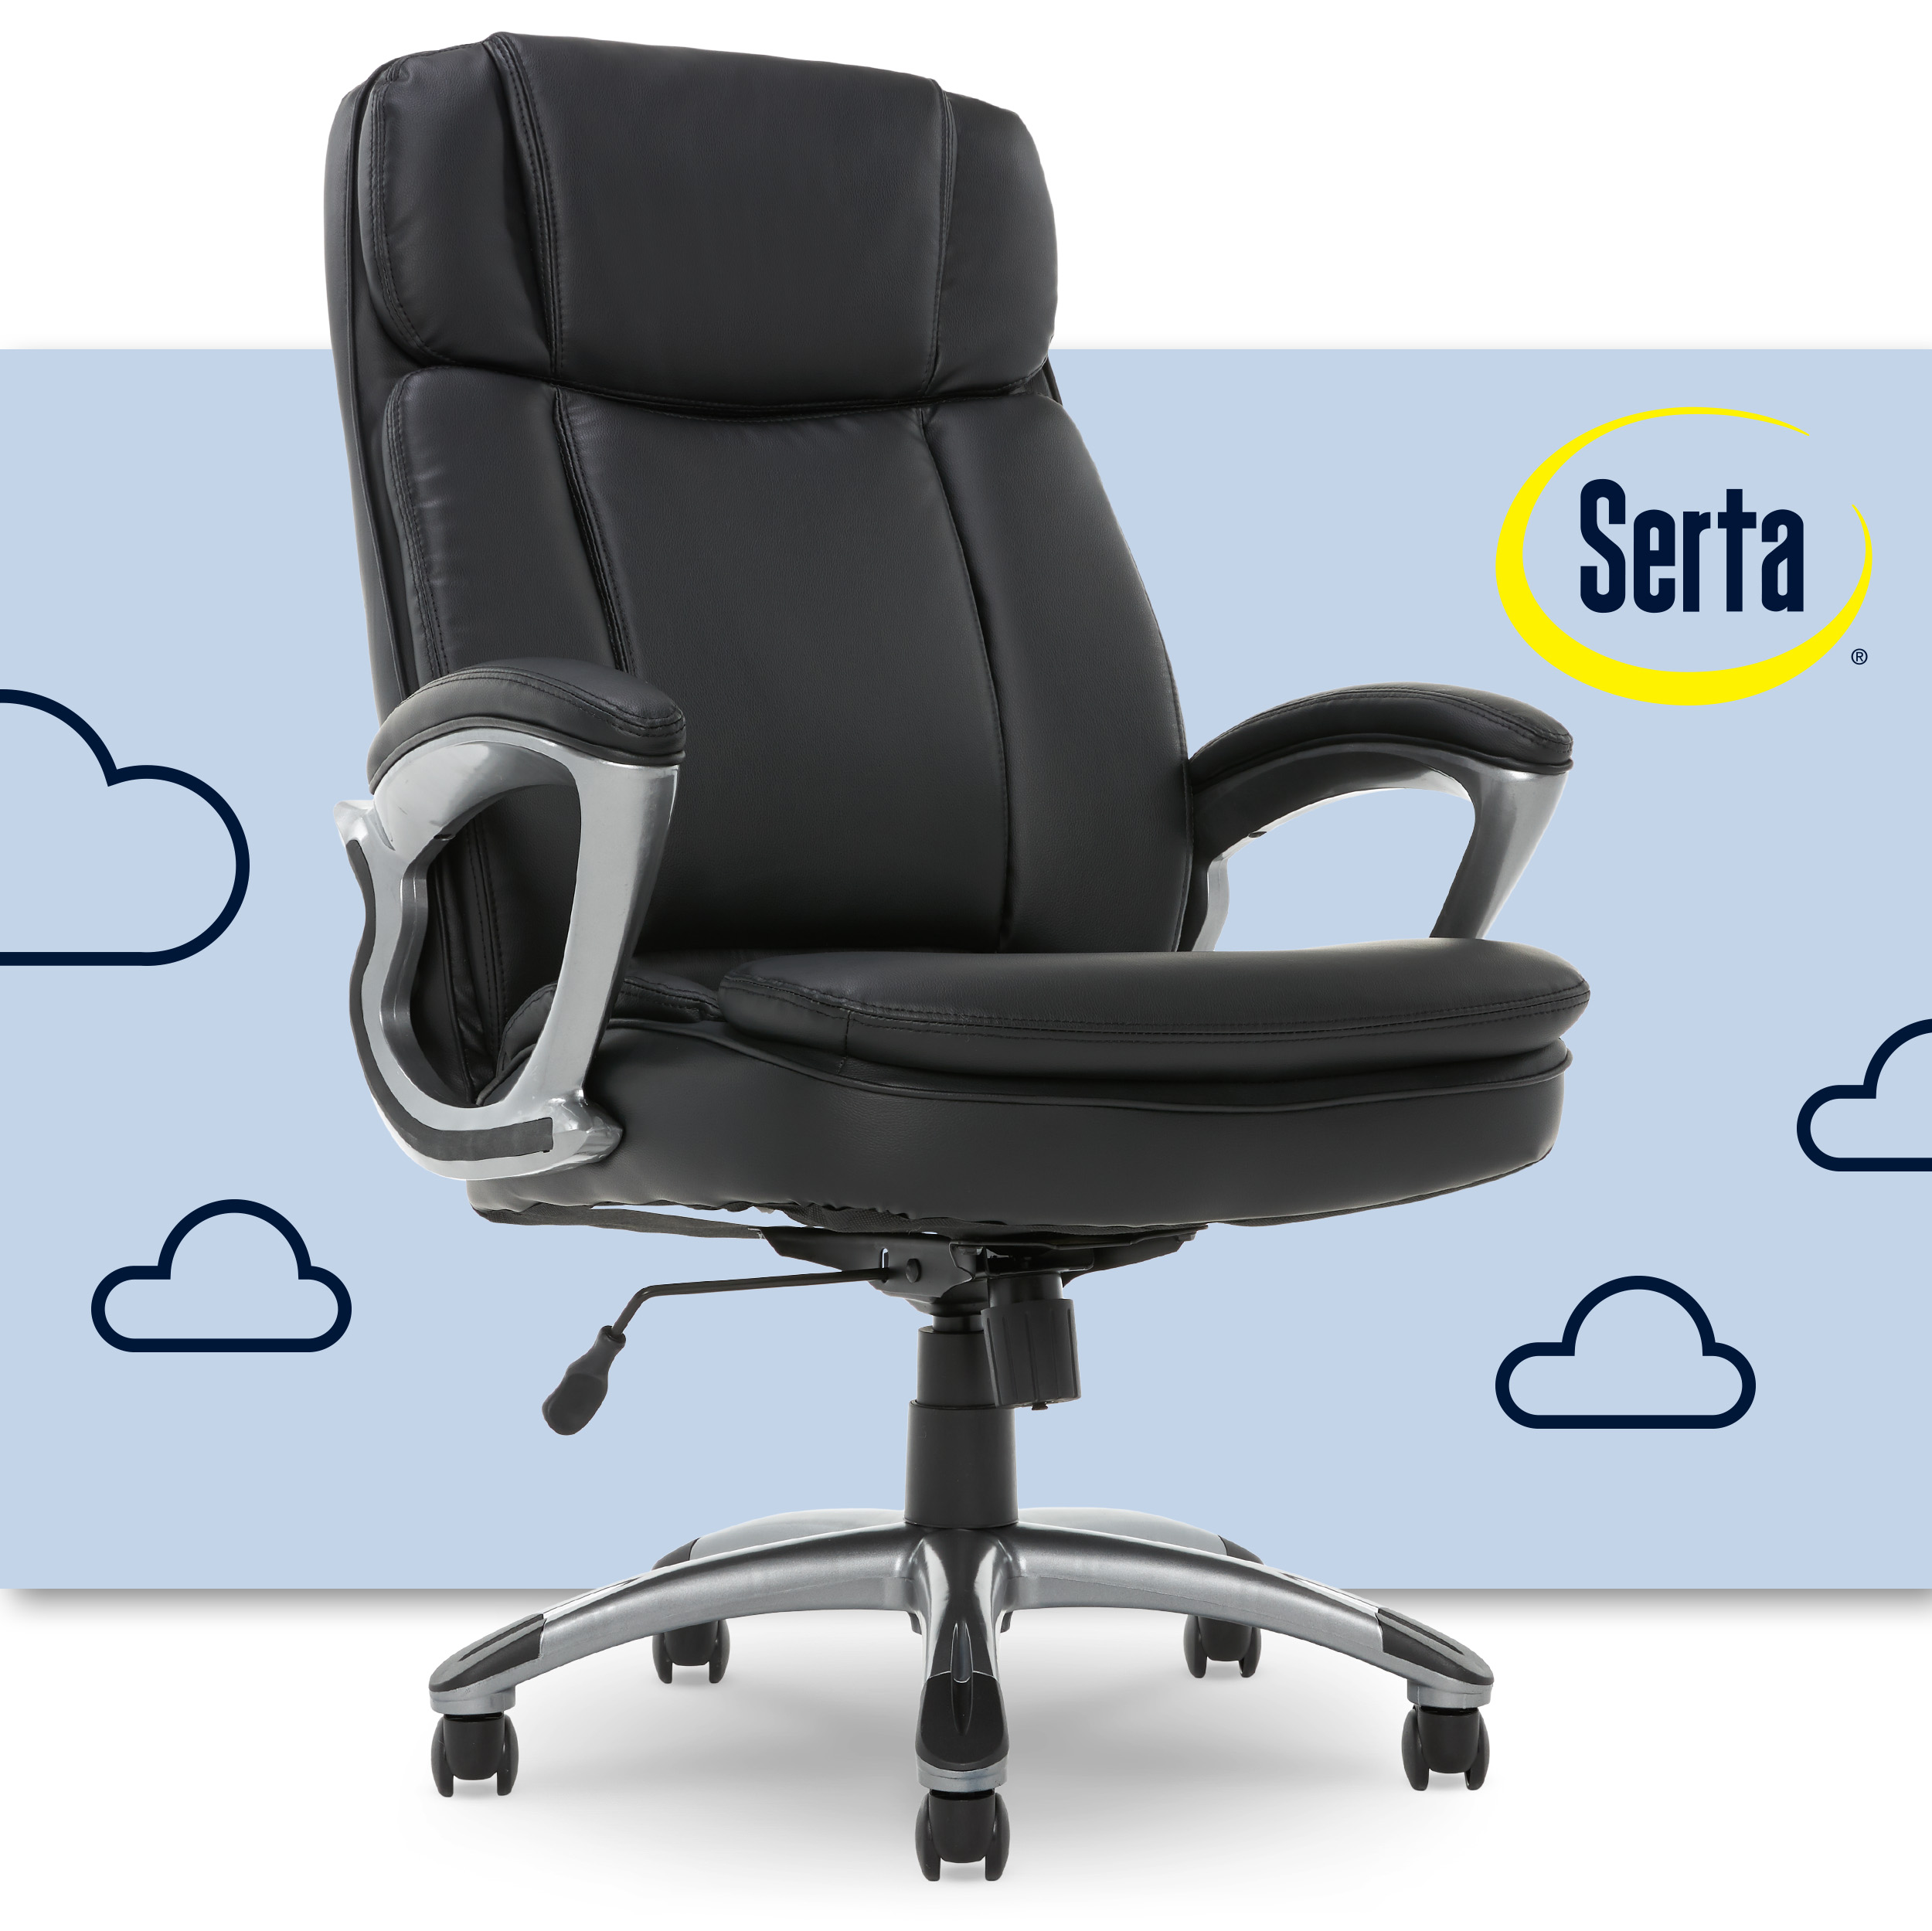 Serta Puresoft Faux Leather Big and Tall Executive Office Chair, Black - image 1 of 22